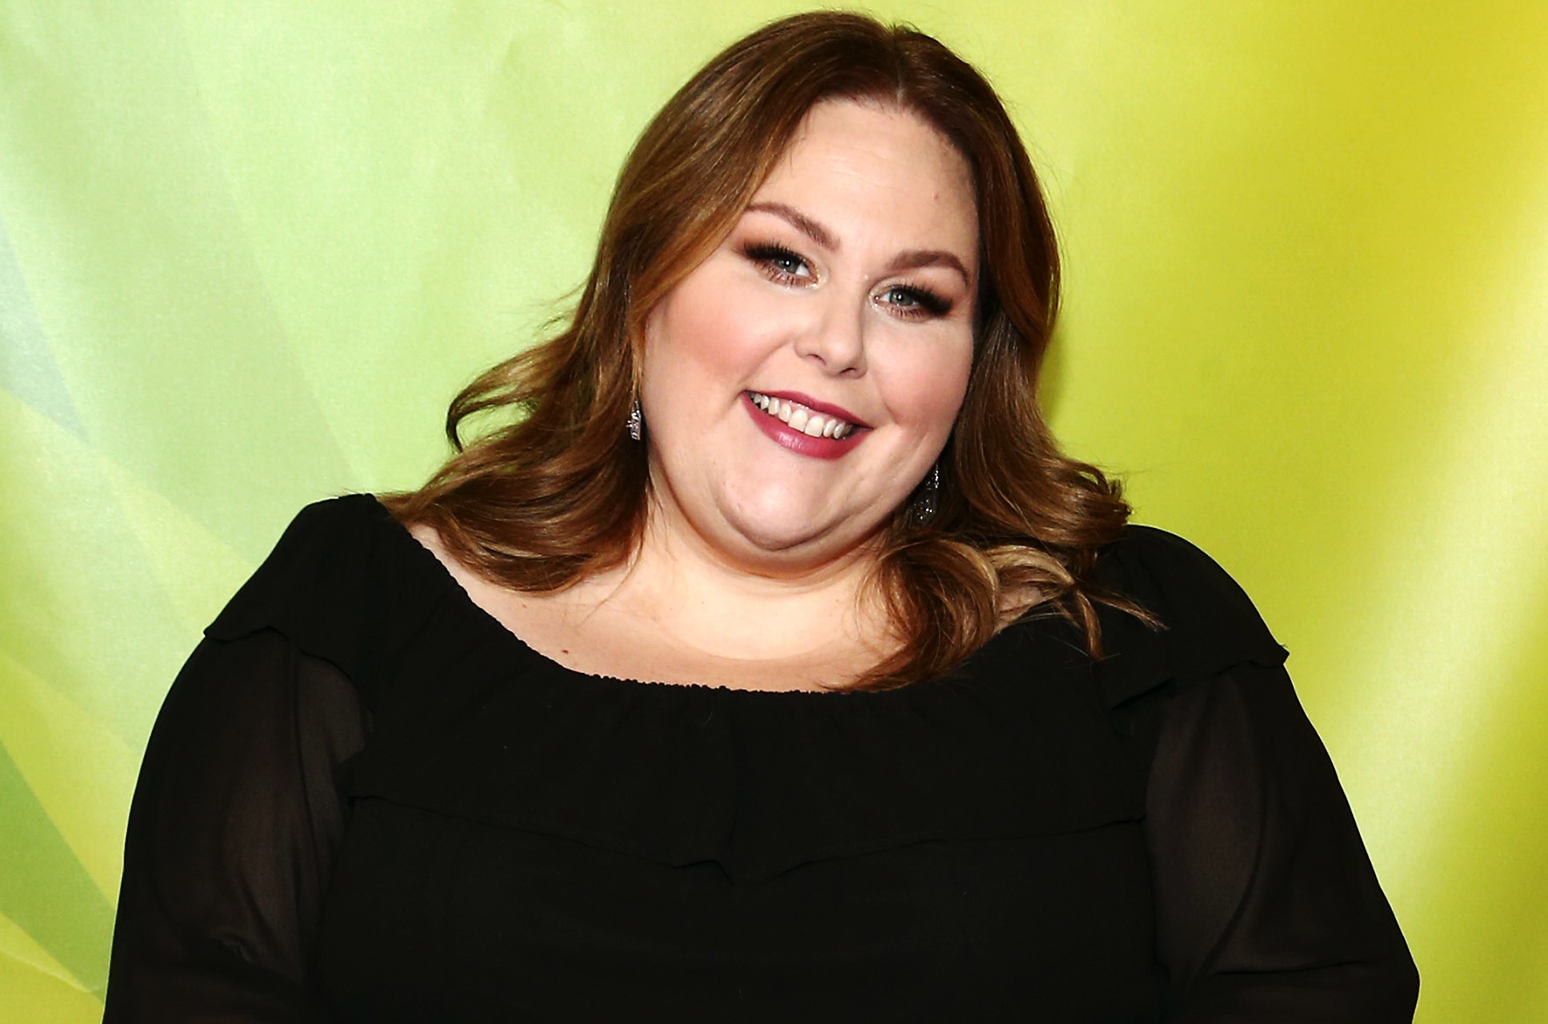 Chrissy Metz On Signing Her First Recording Contract: 'The Genuine Love Was Inspiring'